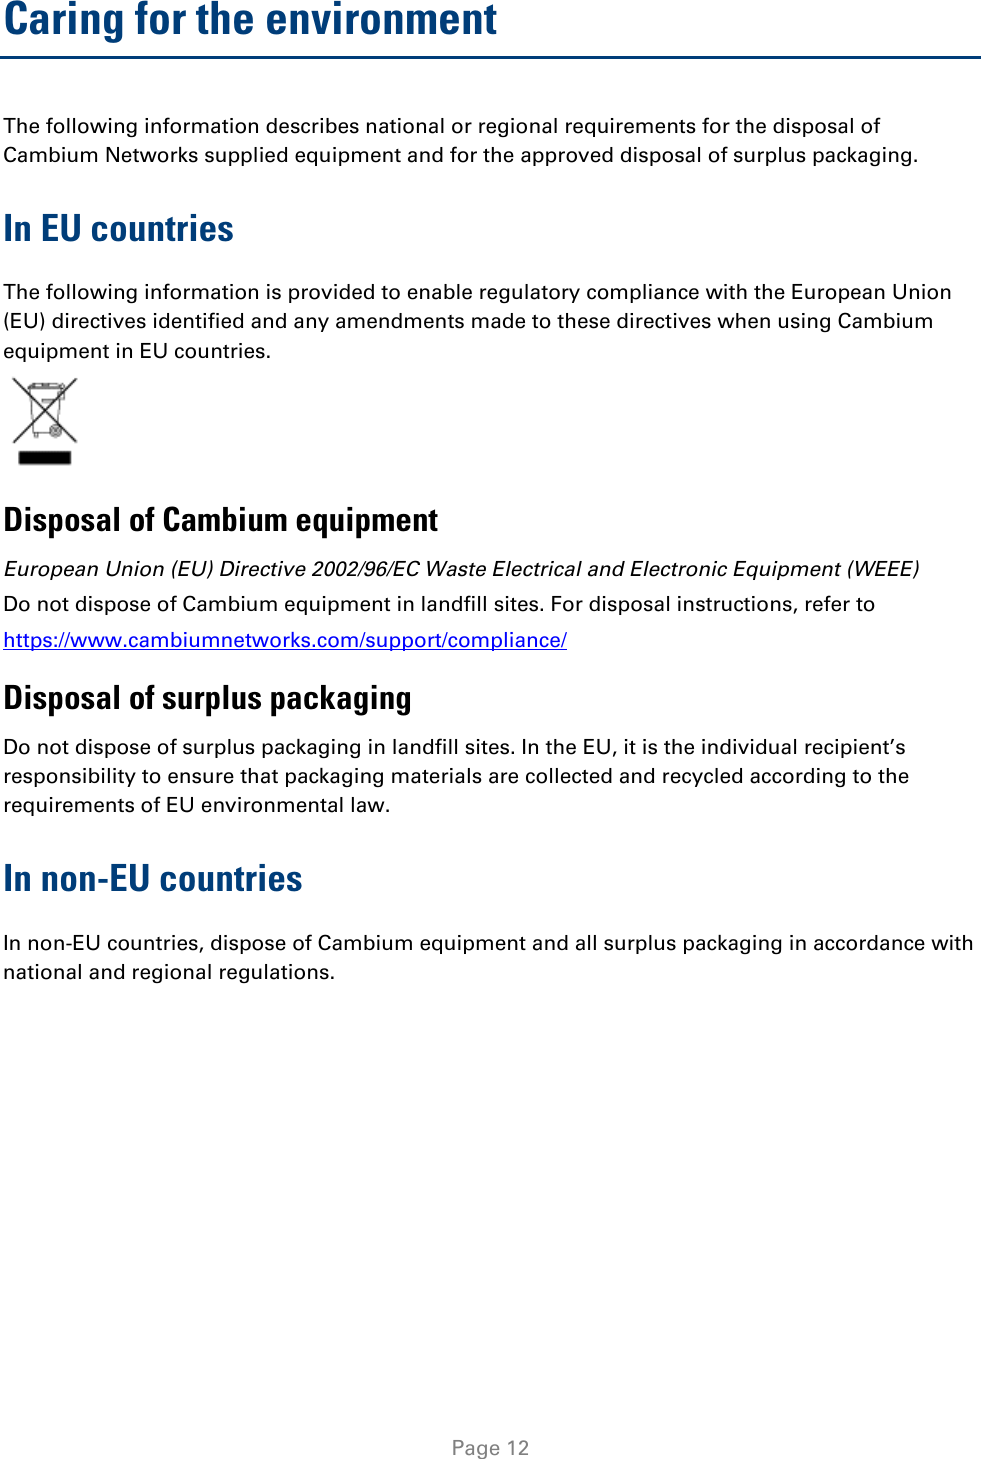   Page 12 Caring for the environment The following information describes national or regional requirements for the disposal of Cambium Networks supplied equipment and for the approved disposal of surplus packaging. In EU countries The following information is provided to enable regulatory compliance with the European Union (EU) directives identified and any amendments made to these directives when using Cambium equipment in EU countries.  Disposal of Cambium equipment European Union (EU) Directive 2002/96/EC Waste Electrical and Electronic Equipment (WEEE) Do not dispose of Cambium equipment in landfill sites. For disposal instructions, refer to  https://www.cambiumnetworks.com/support/compliance/ Disposal of surplus packaging Do not dispose of surplus packaging in landfill sites. In the EU, it is the individual recipient’s responsibility to ensure that packaging materials are collected and recycled according to the requirements of EU environmental law. In non-EU countries In non-EU countries, dispose of Cambium equipment and all surplus packaging in accordance with national and regional regulations.  